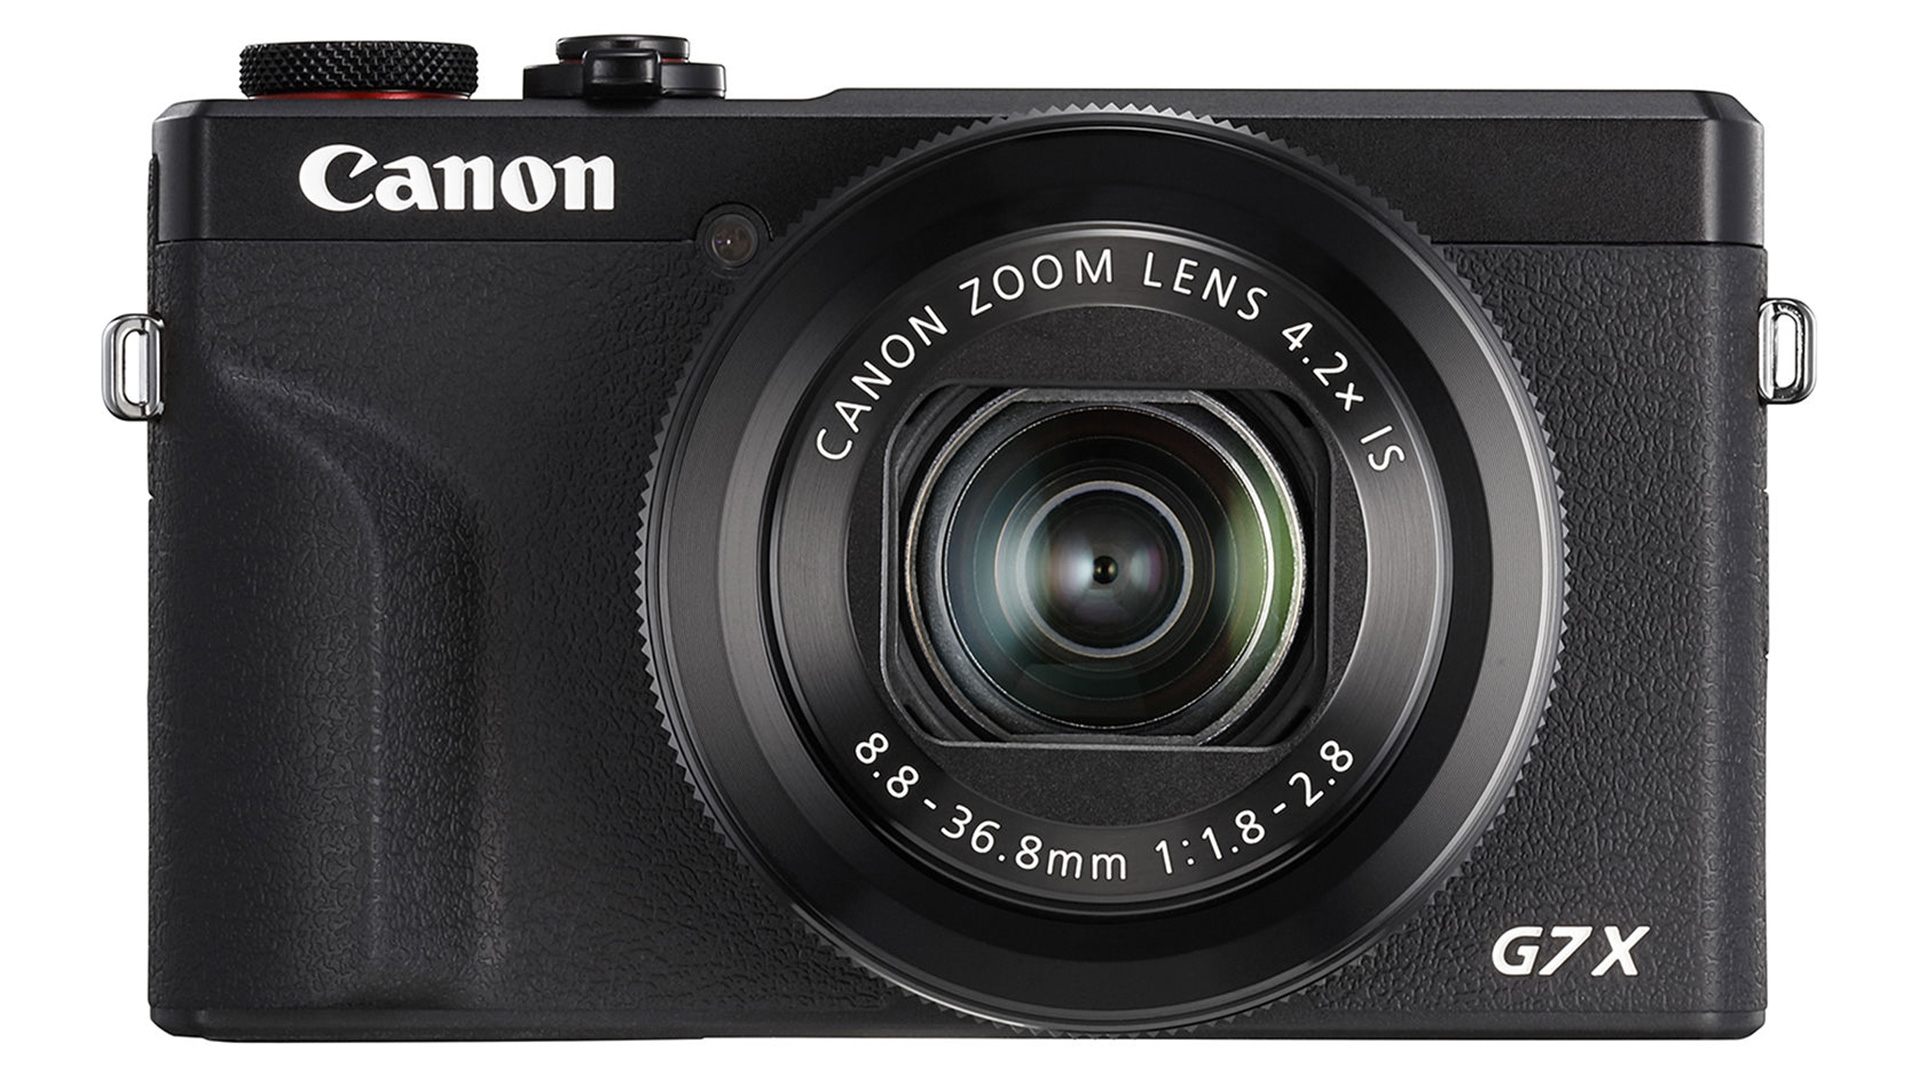 Best Canon Point-and-Shoot Camera: Canon PowerShot G7 X Mark III